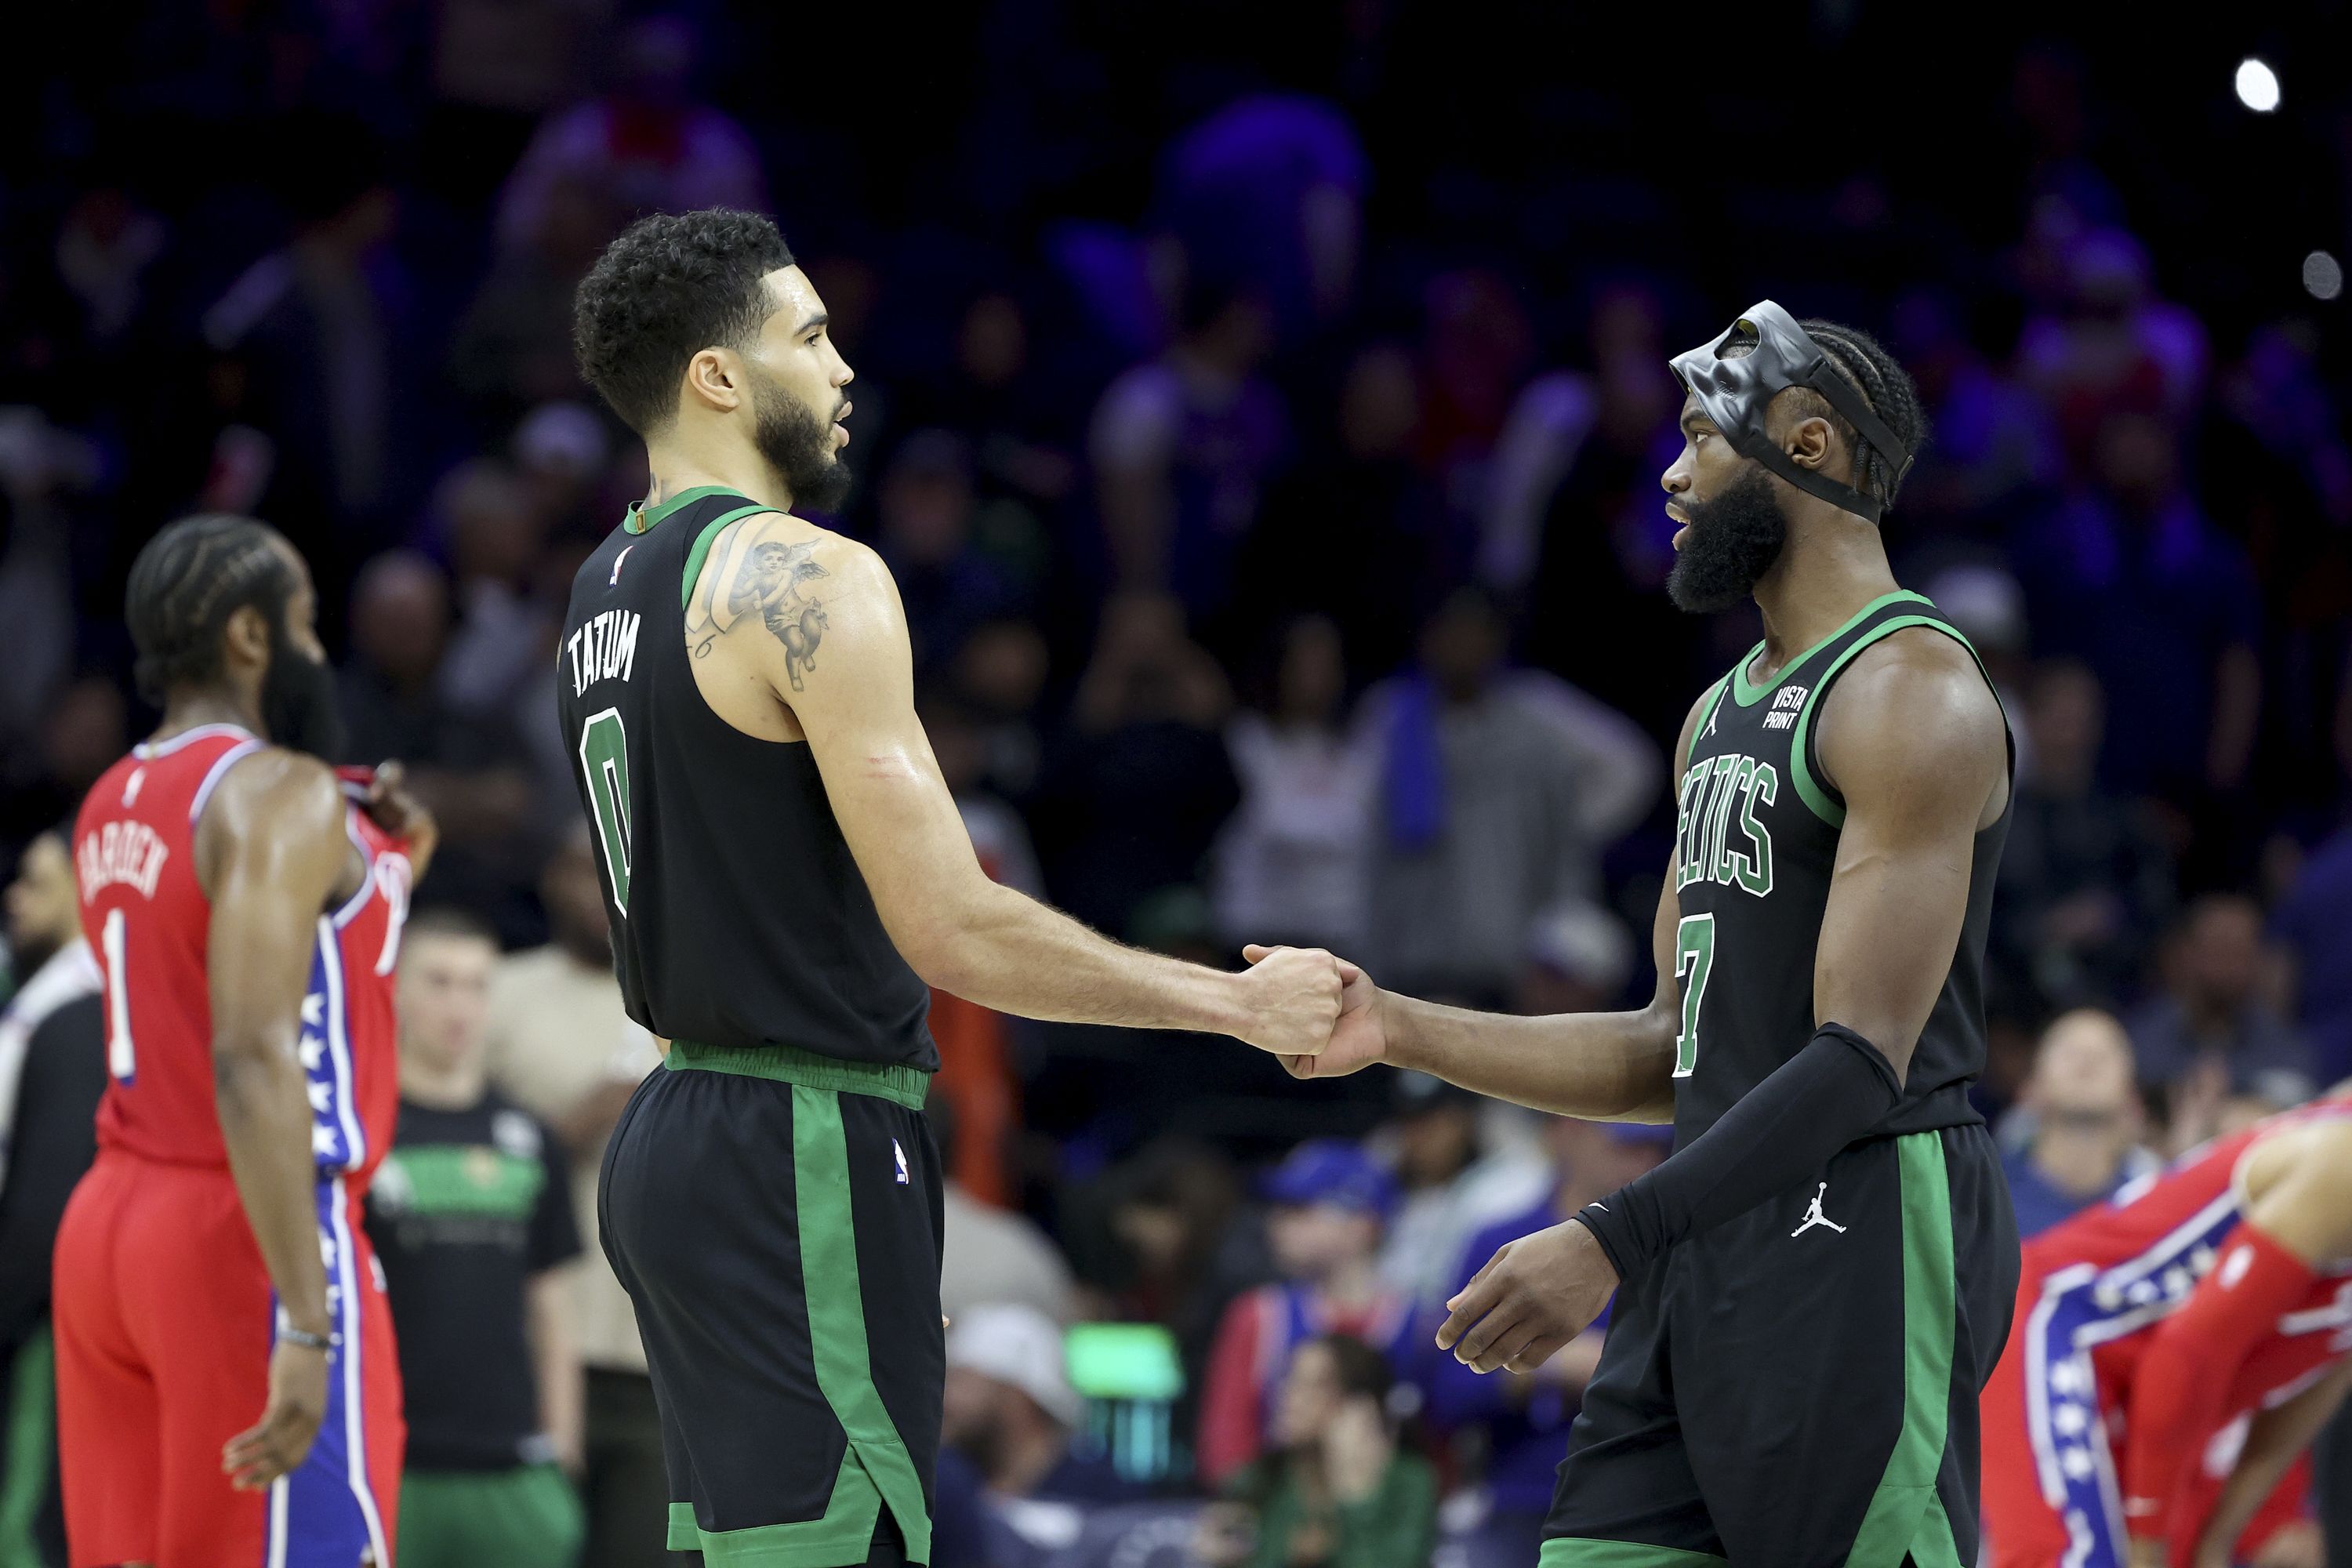 Marcus Smart reveals true feelings about trade from Celtics